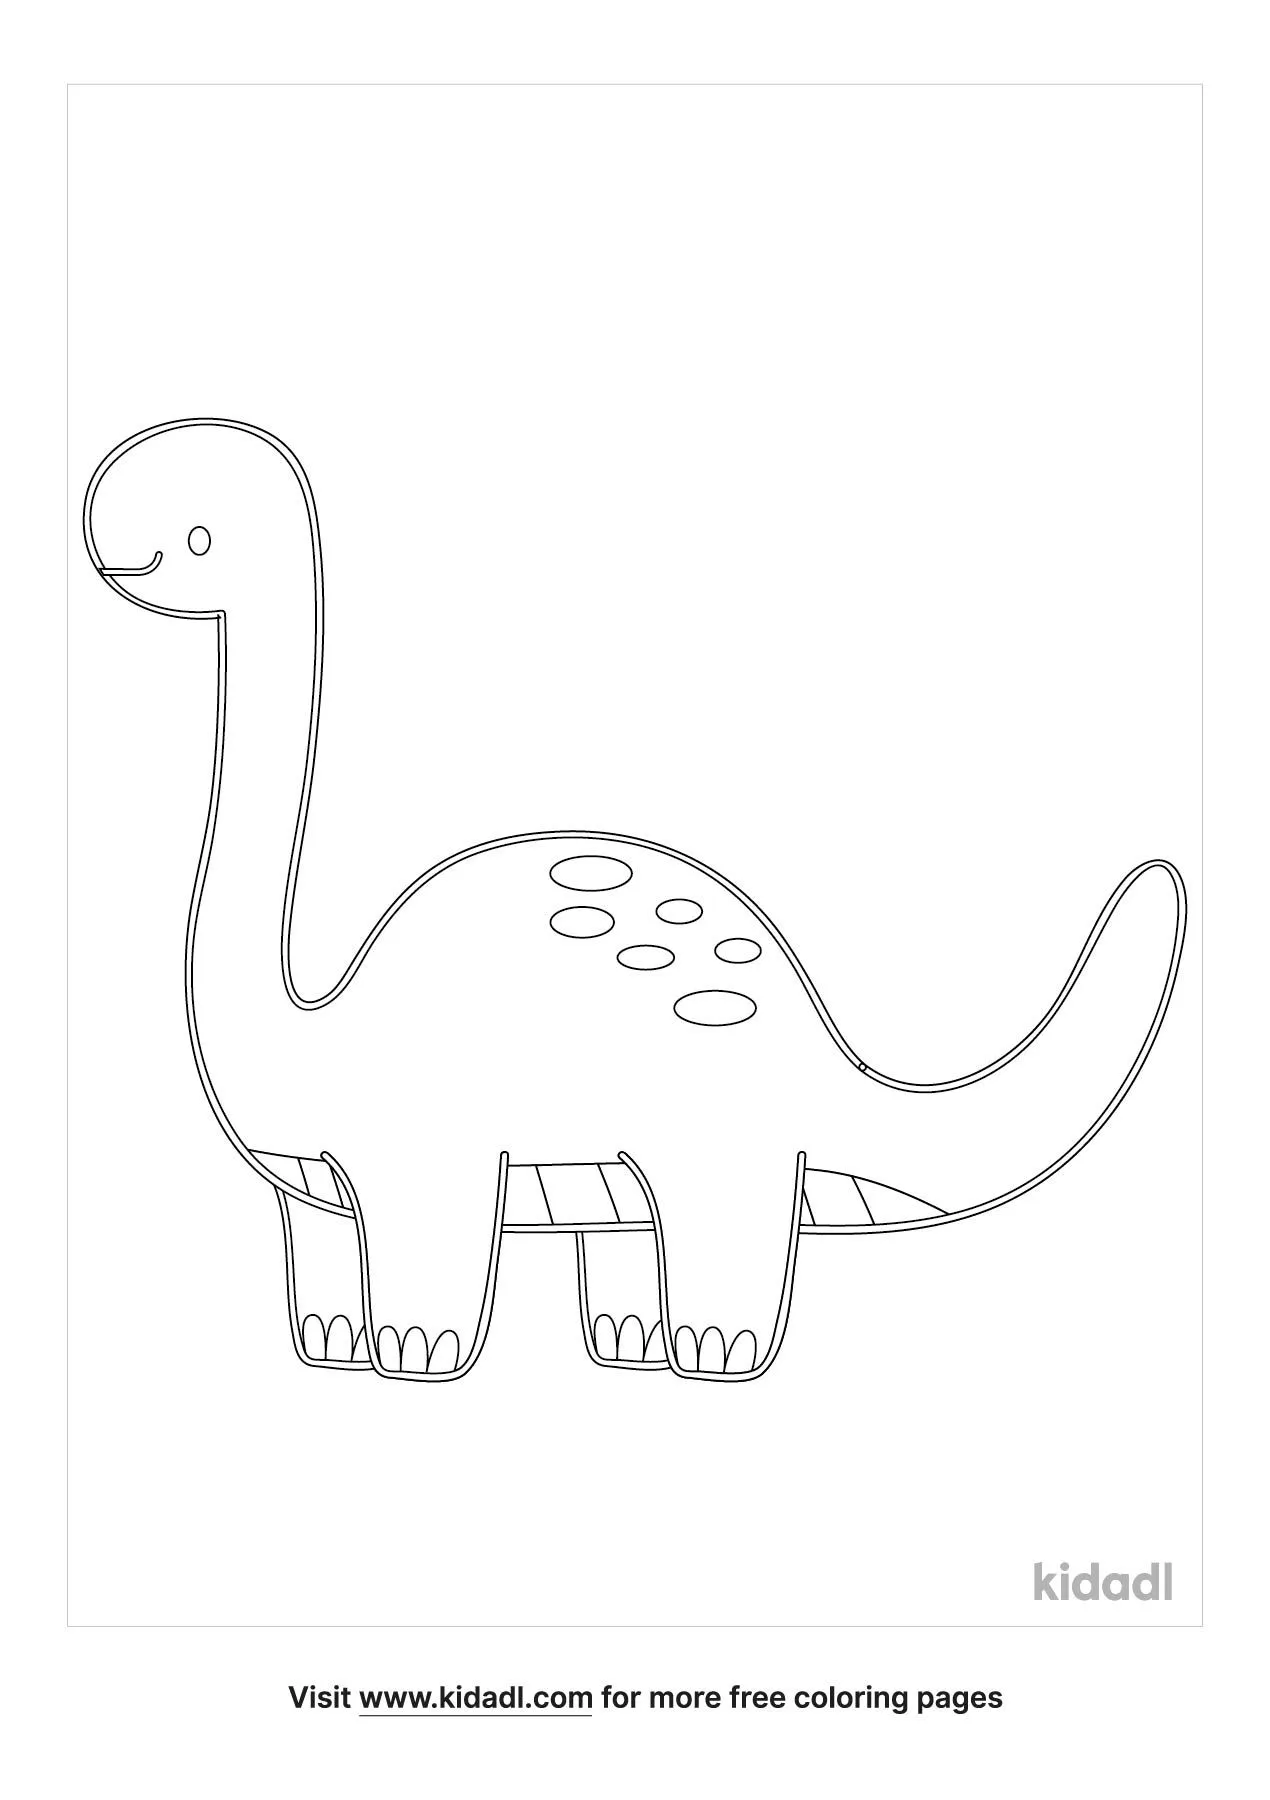 Cute Dinosaur Coloring Pages   Free Dinosaurs Coloring Pages   Kidadl